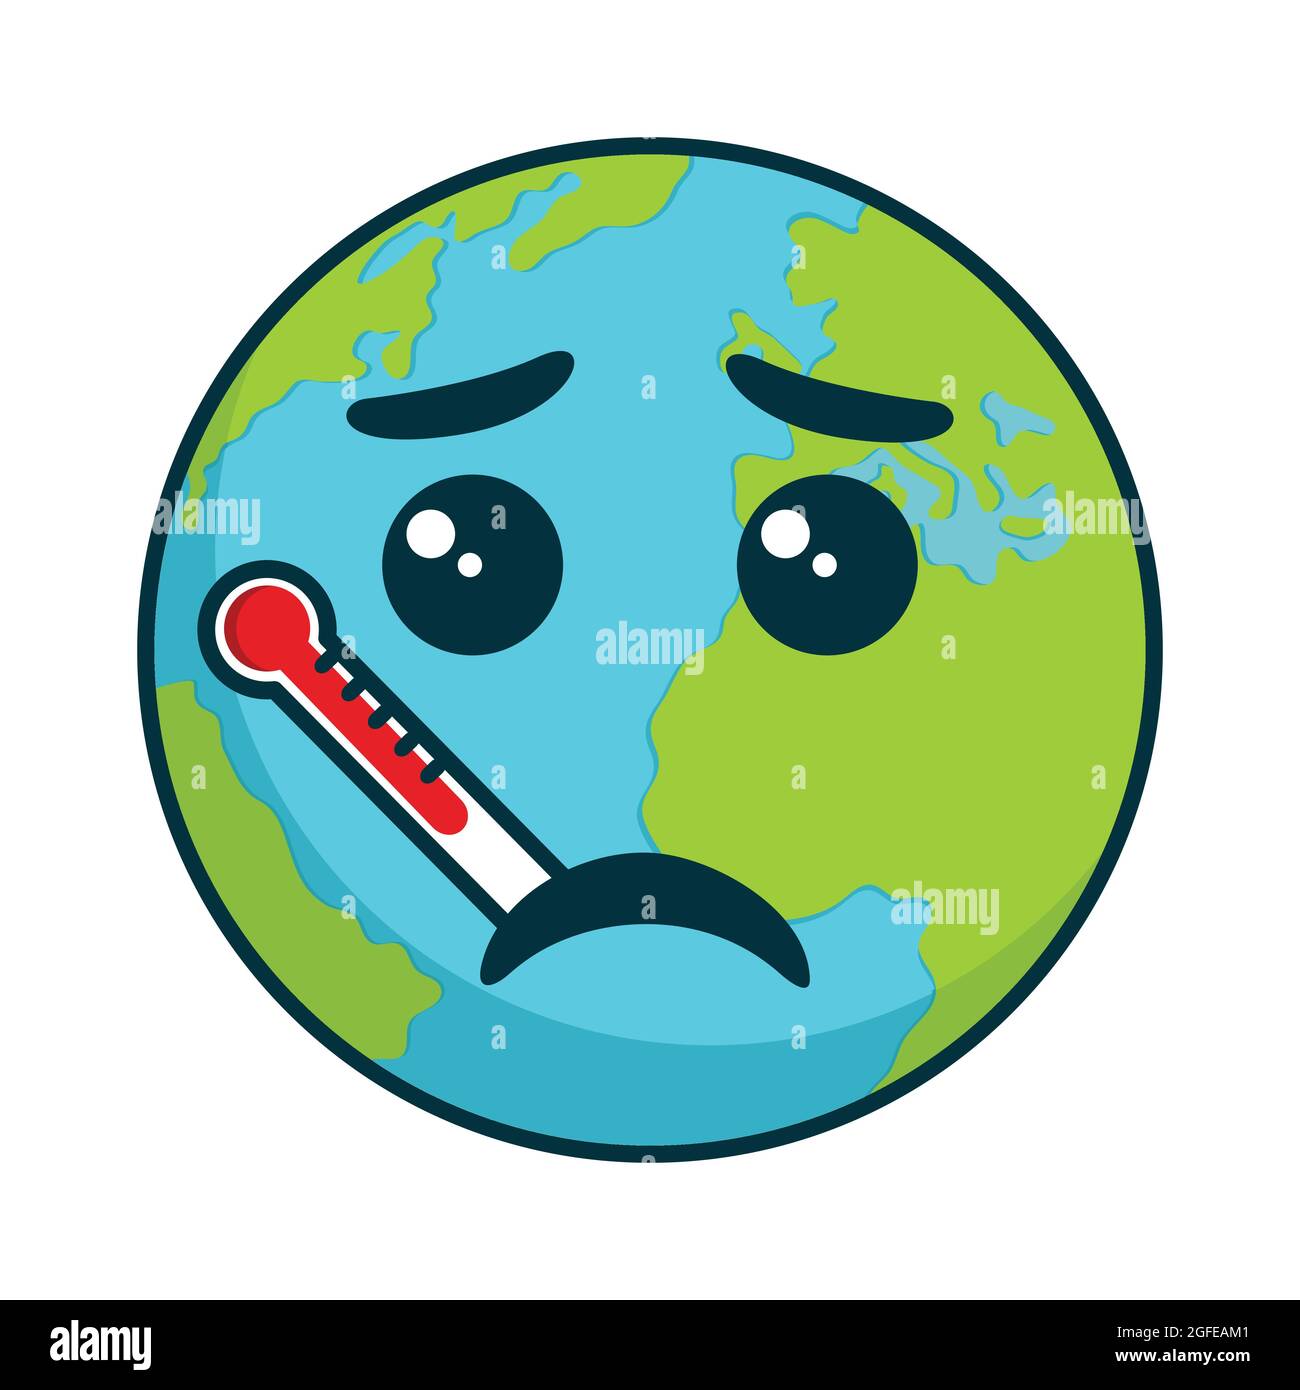 Earth cartoon vector illustration isolated. Globe flat design vector illustration for banner, web and infographics. Earth with thermometer. Stock Vector